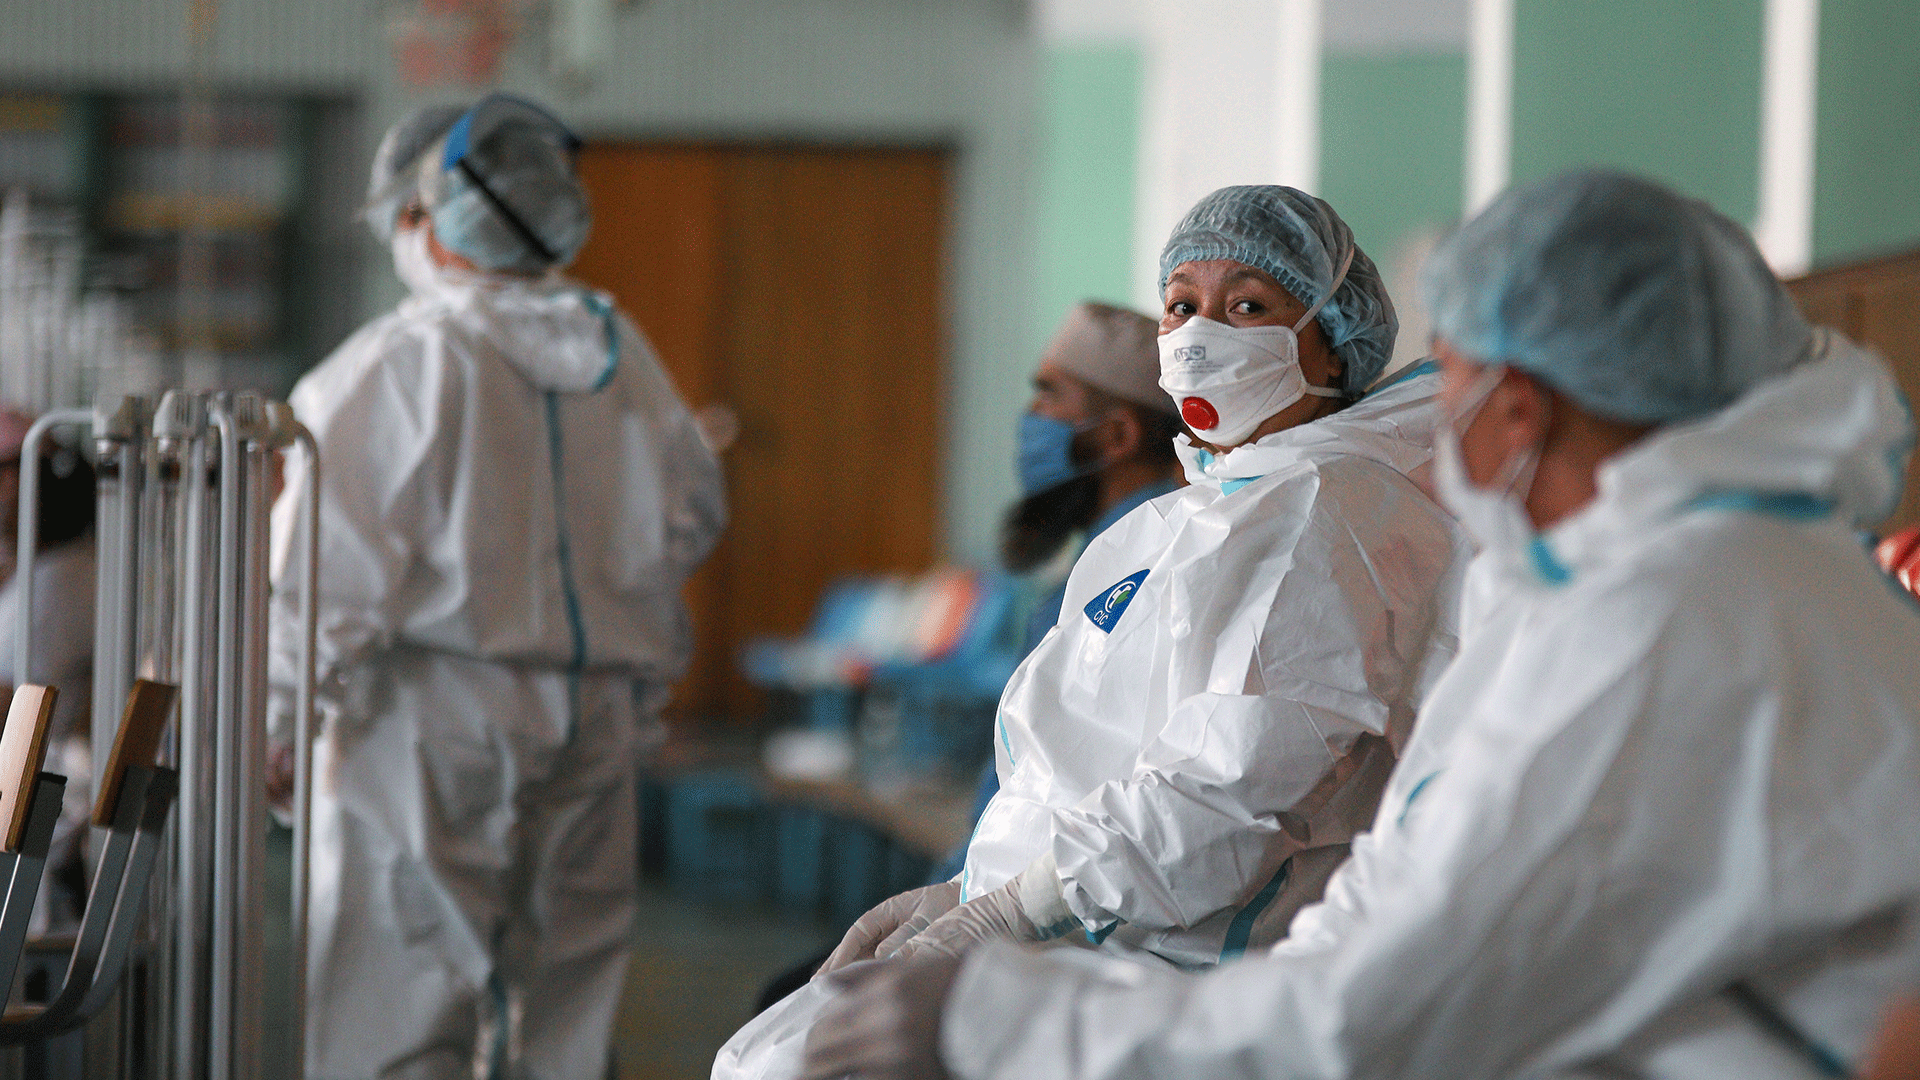 Confronting a global pandemic